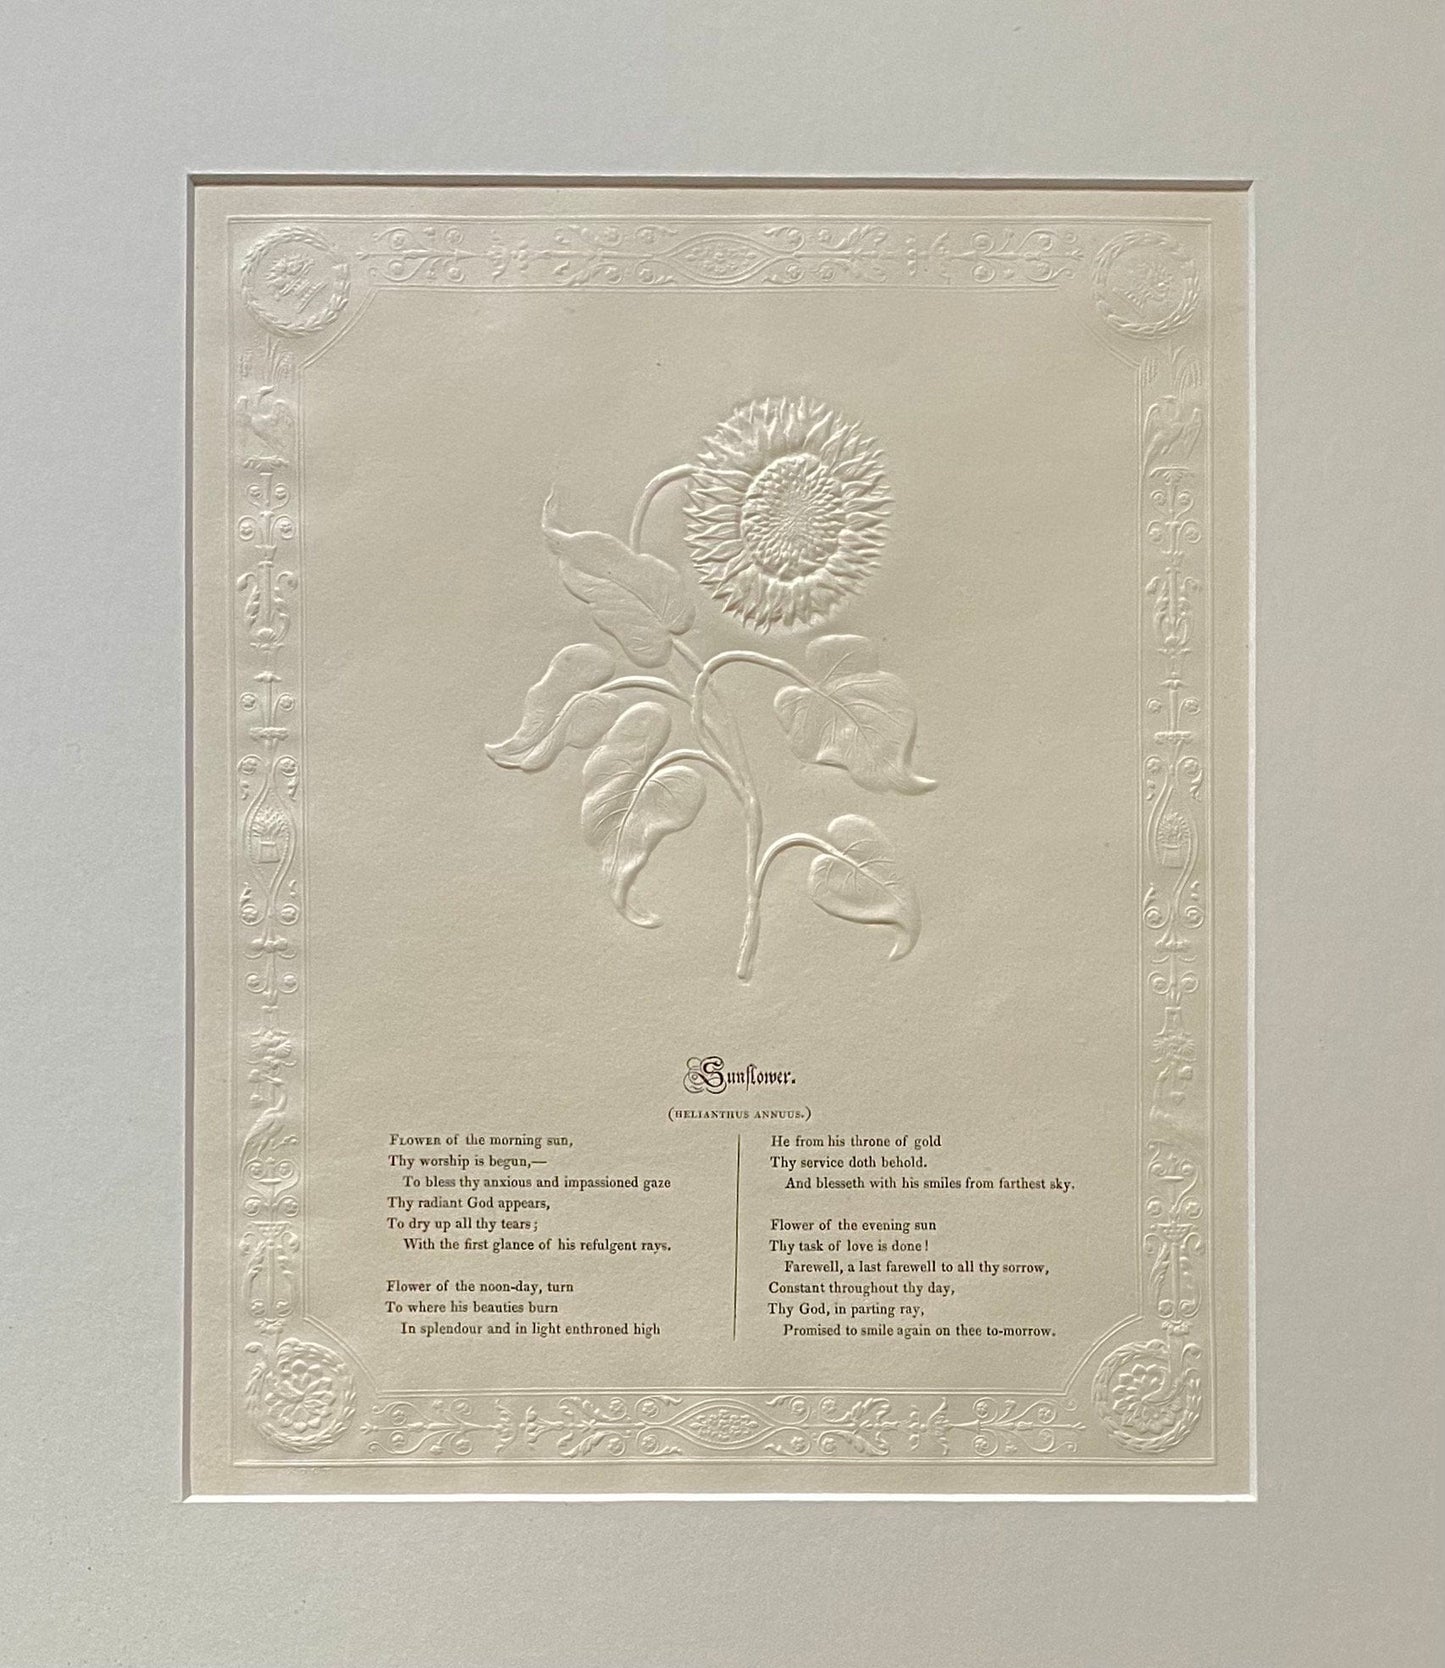 Sunflower. An Antique Embossed Paper Image. With Poem in Black Script. Framed Using Clear Glass in a Limed Frame. Size: 35 x 30.5 cms.